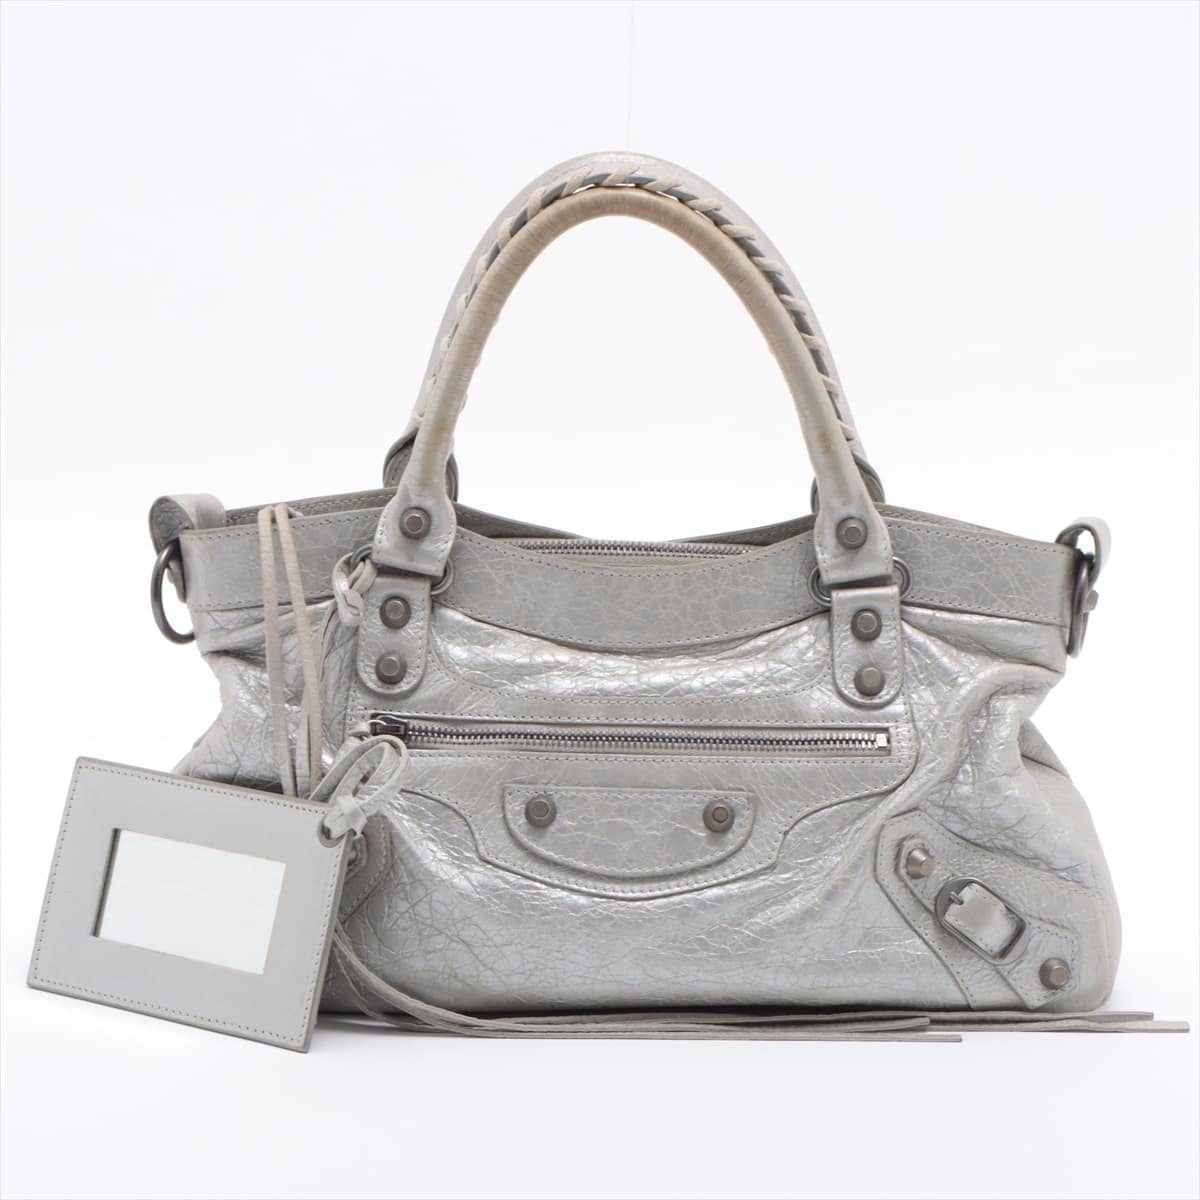 Balenciaga The First Leather 2way shoulder bag Silver 103208 With mirror